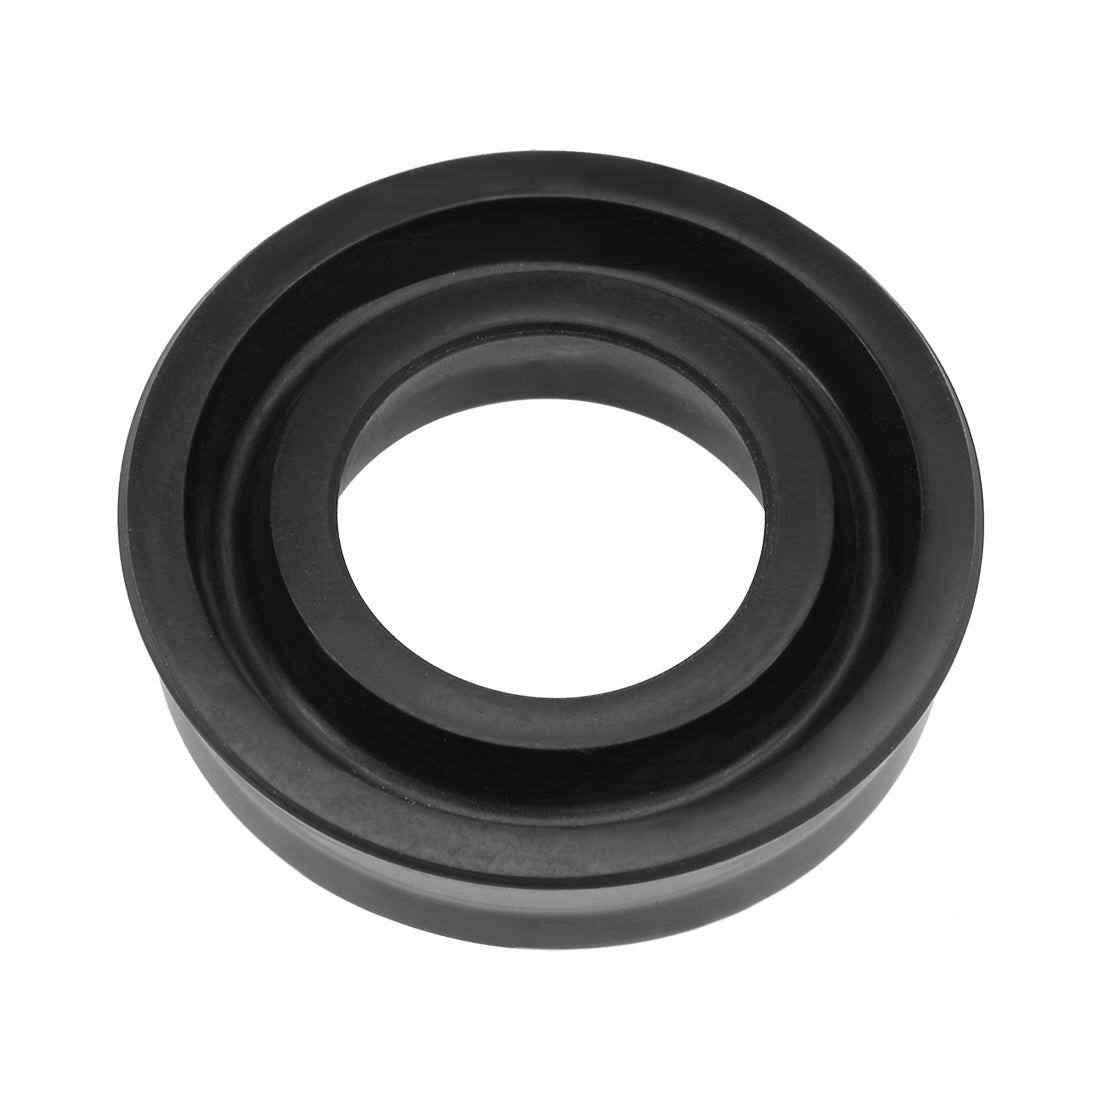 uxcell Uxcell Hydraulic Seal, Piston Shaft USH Oil Sealing O-Ring, 11.2mm x 19.2mm x 5mm